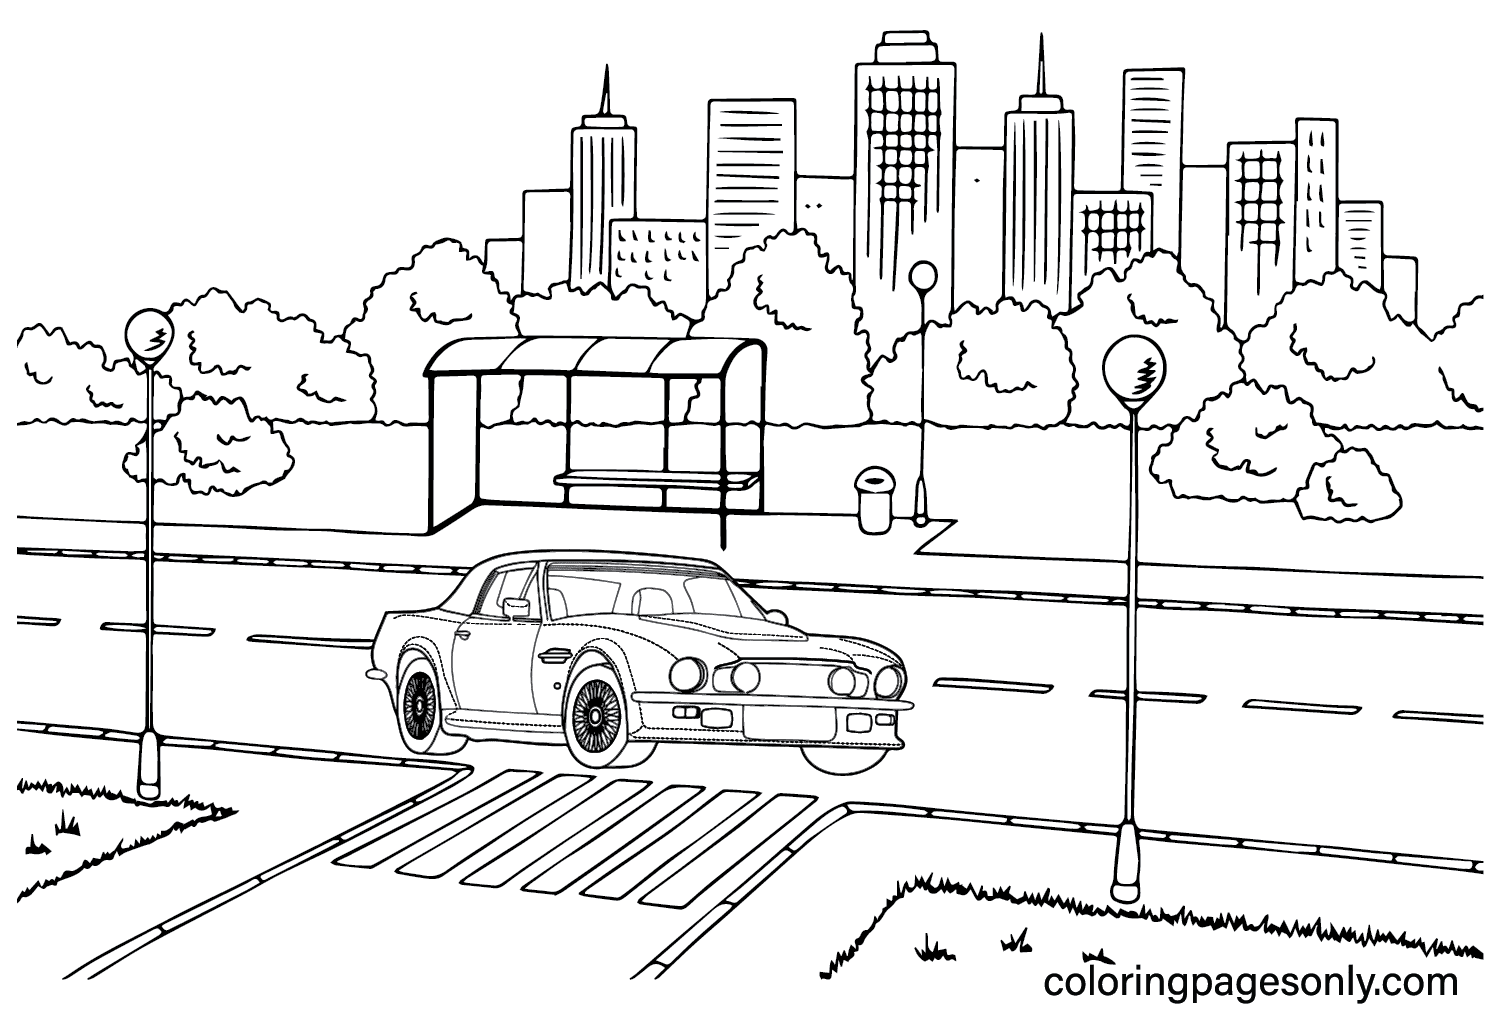 Aston Martin V8 Coloring Page from Aston Martin